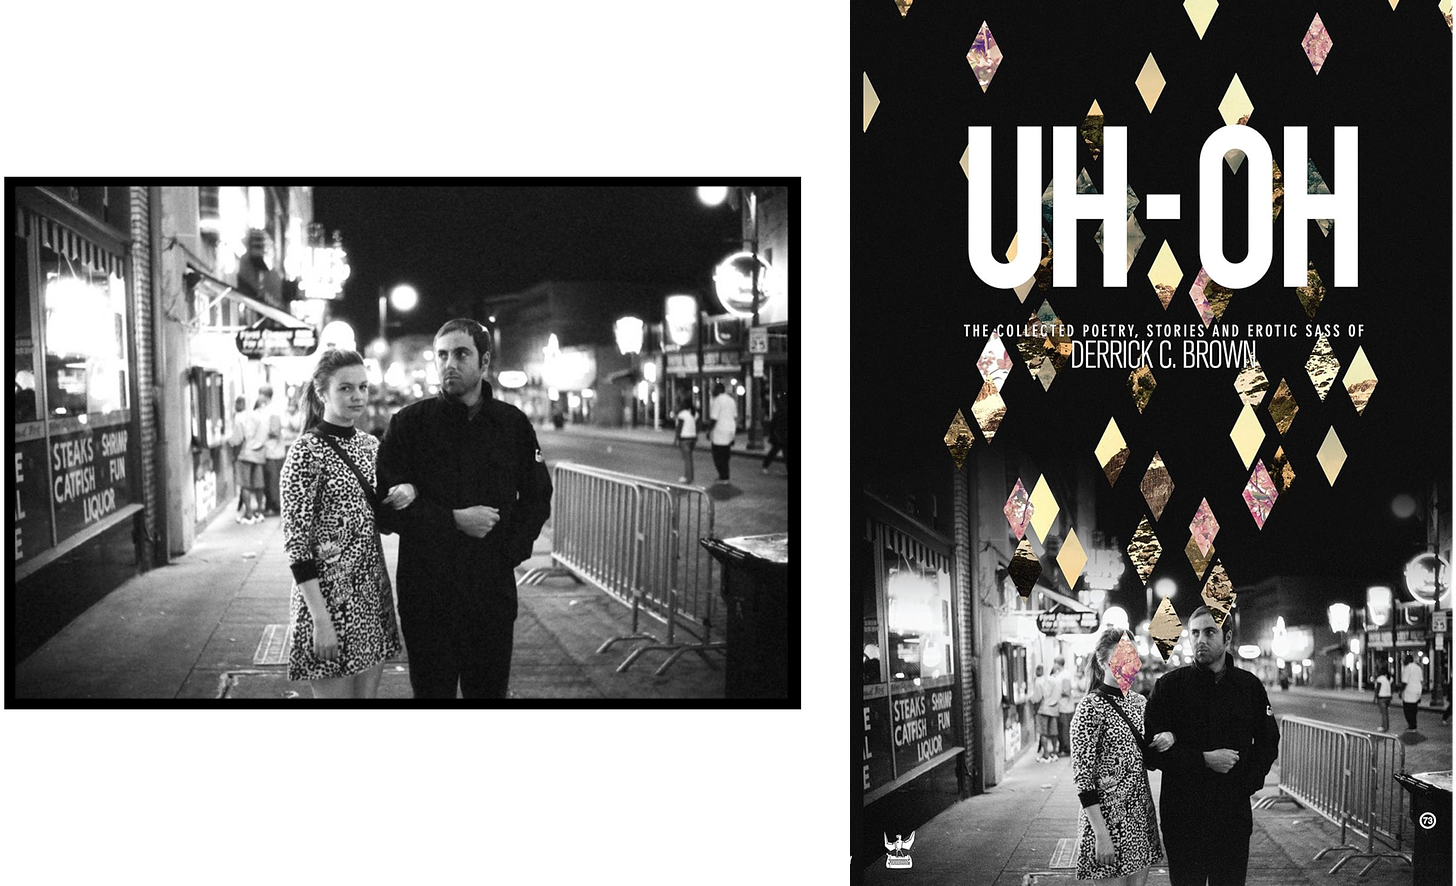 Left, a black-and-white photo of Amber and Derrick arm in arm standing on a sidewalk.  Right, the same photo has been turned into a book cover for "Uh-Oh" by Derrick C. Brown. Amber's face is now covered with one of many shiny diamond shapes that have been added to the image.